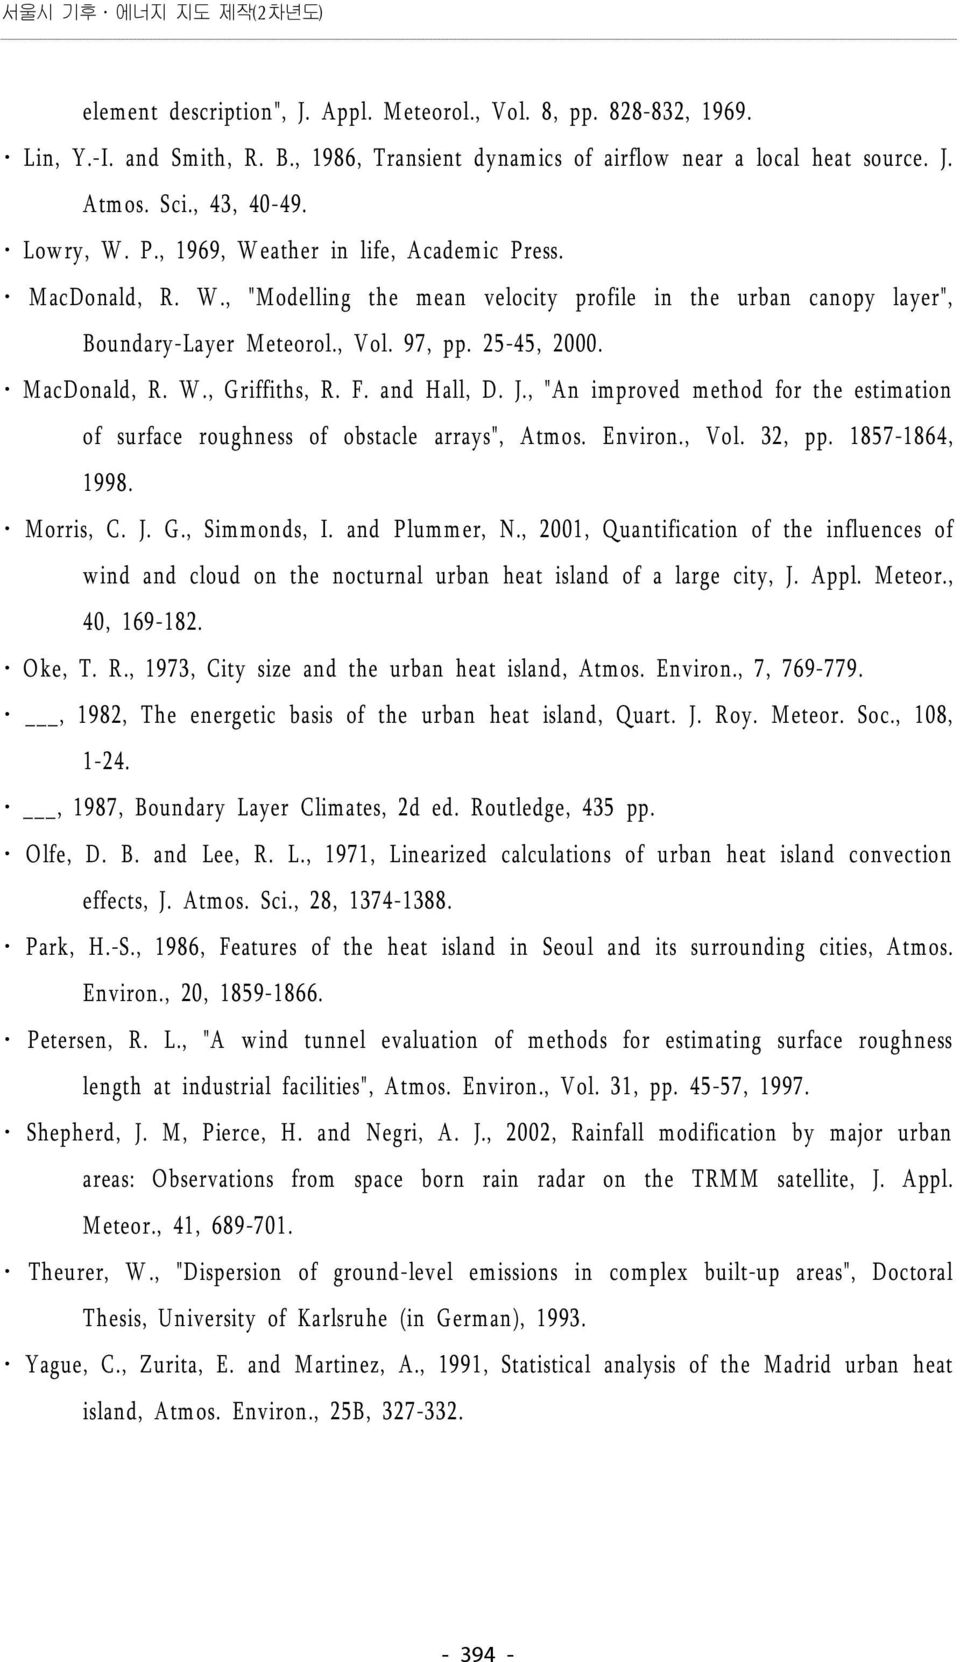 MacDonald, R. W., Griffiths, R. F. and Hall, D. J., "An improved method for the estimation of surface roughness of obstacle arrays", Atmos. Environ., Vol. 32, pp. 1857-1864, 1998. Morris, C. J. G., Simmonds, I.